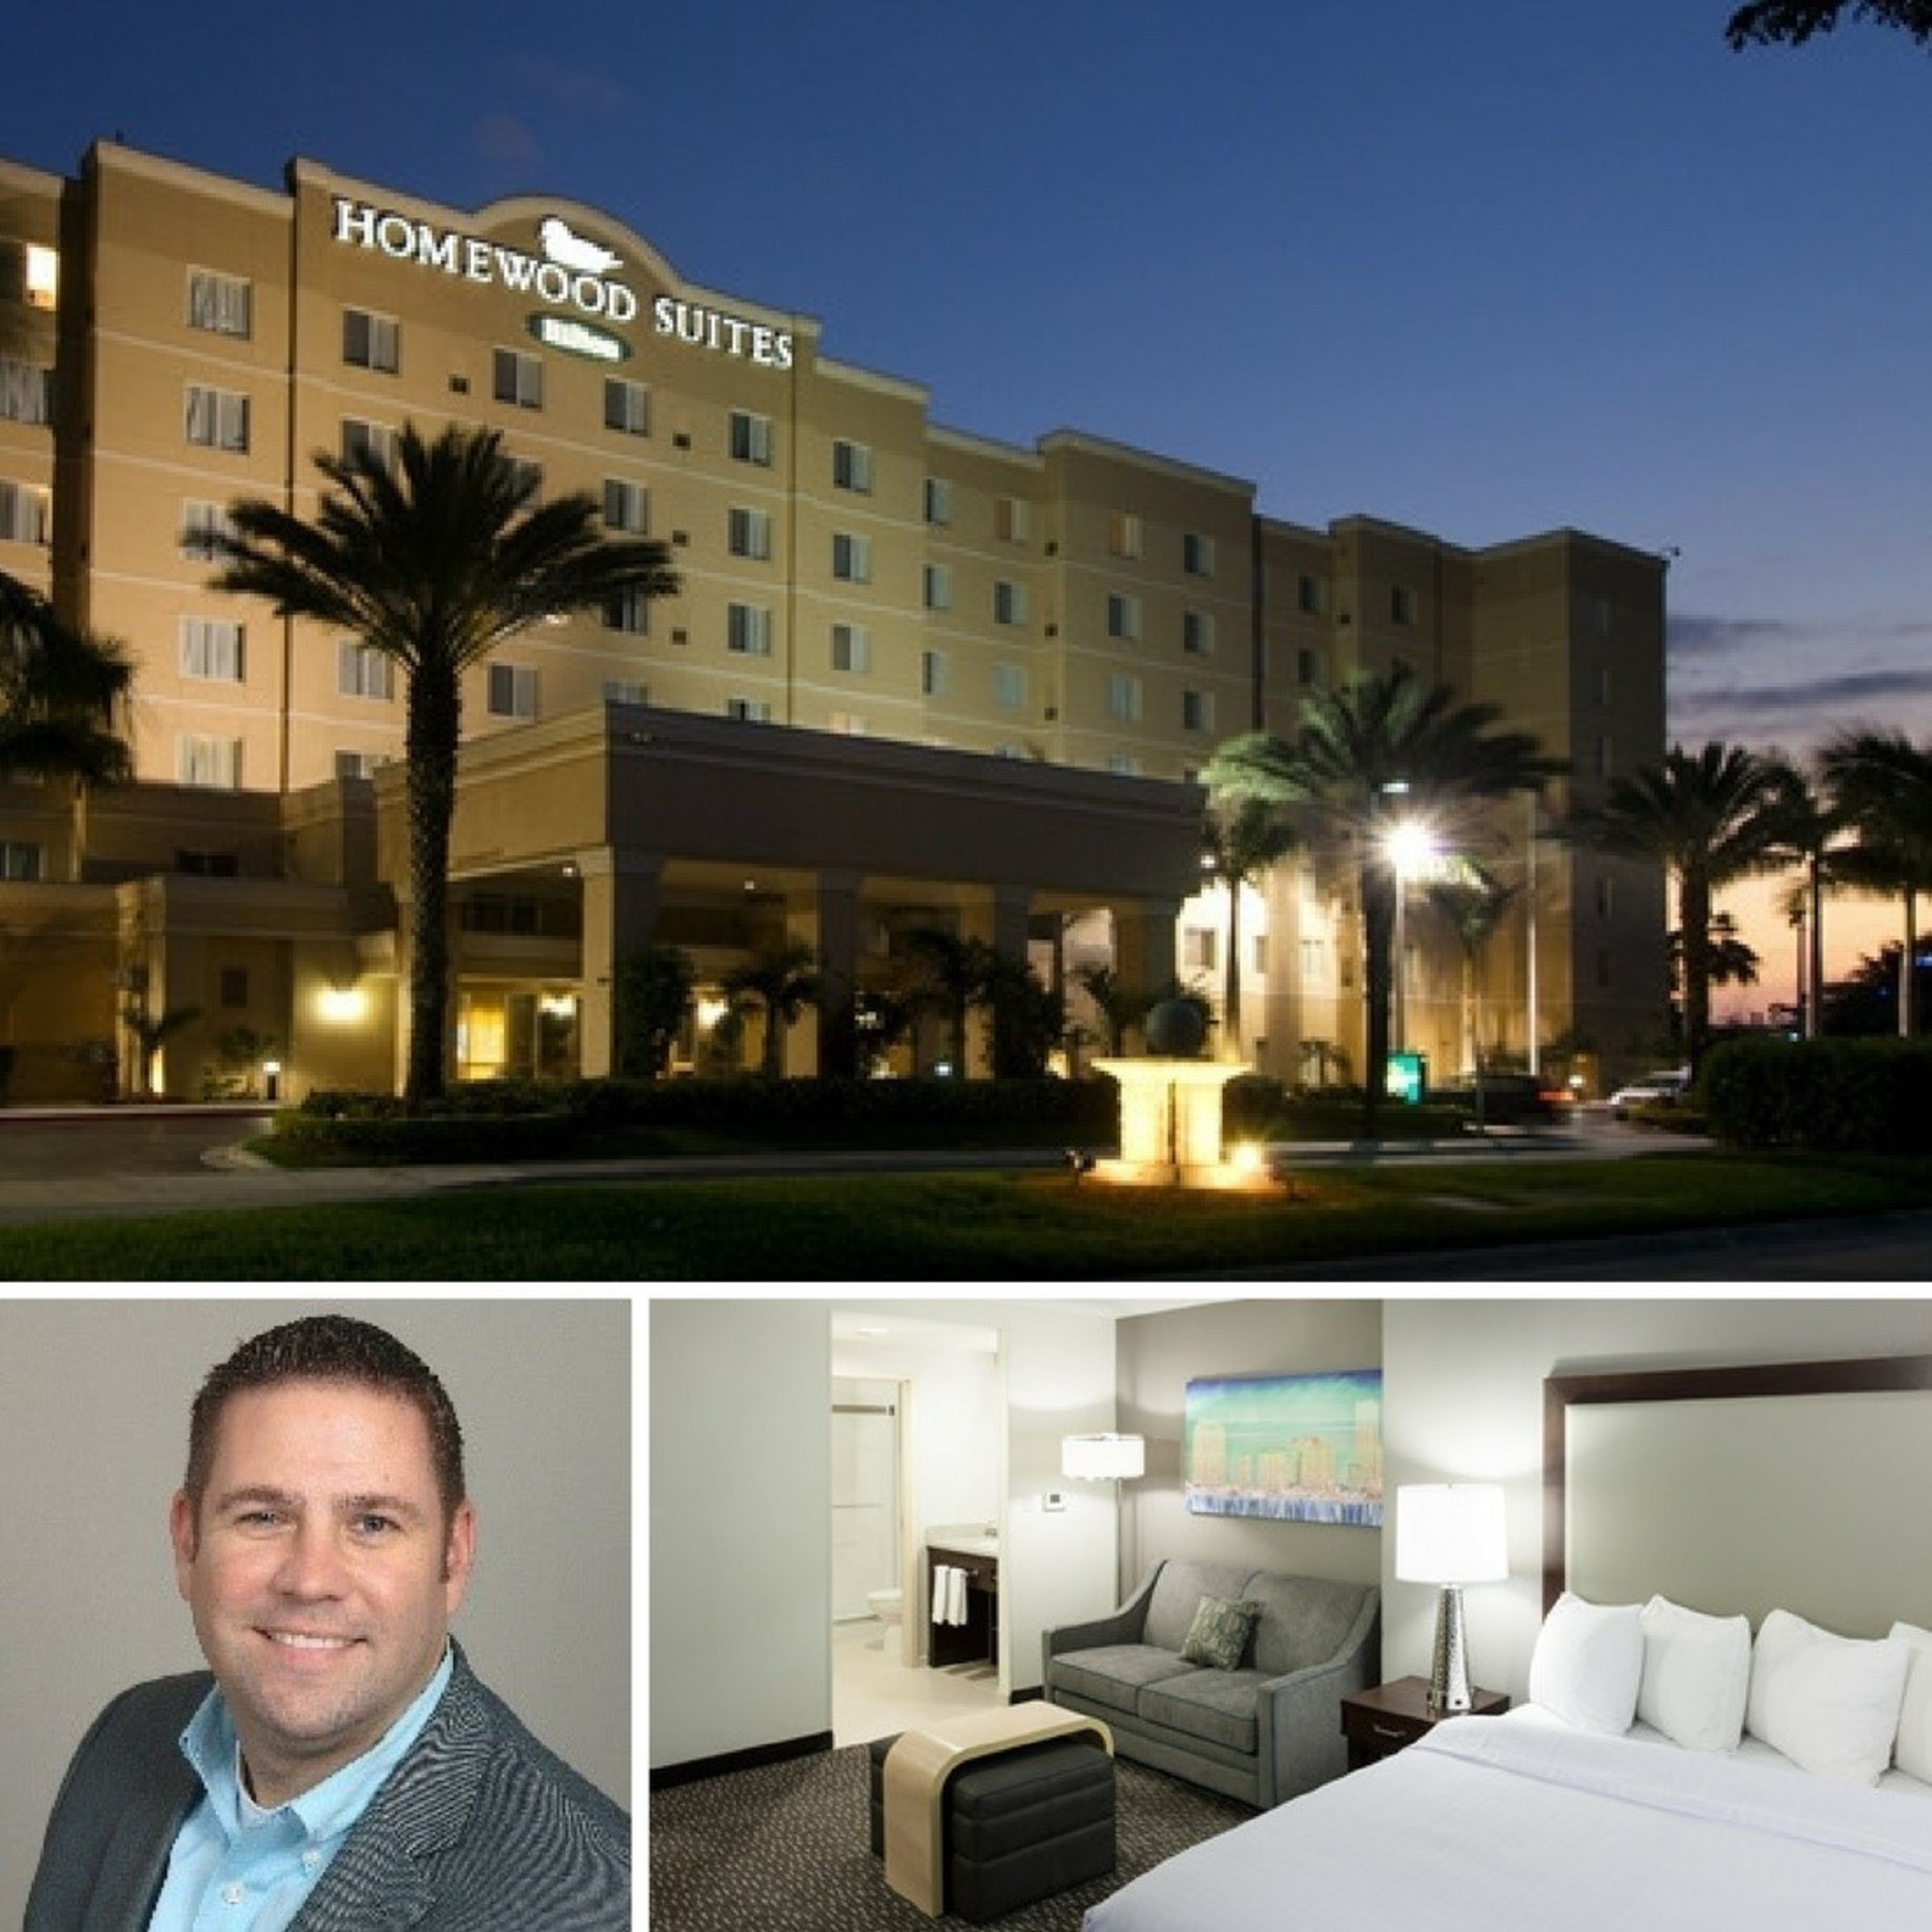 Chris Hammons has been named the general manager of Homewood Suites by Hilton Miami-Airport/Blue Lagoon. The 13-year hospitality veteran will take over a hotel with one- and two-bedroom suites boasting complimentary Wi-Fi, three meeting rooms with a total of 1,550 square feet of event space, a business center, fitness room and outdoor pool. For information or to make a reservation, visit www.homewoodsuites3.hilton.com or call 1-305-261-3335.